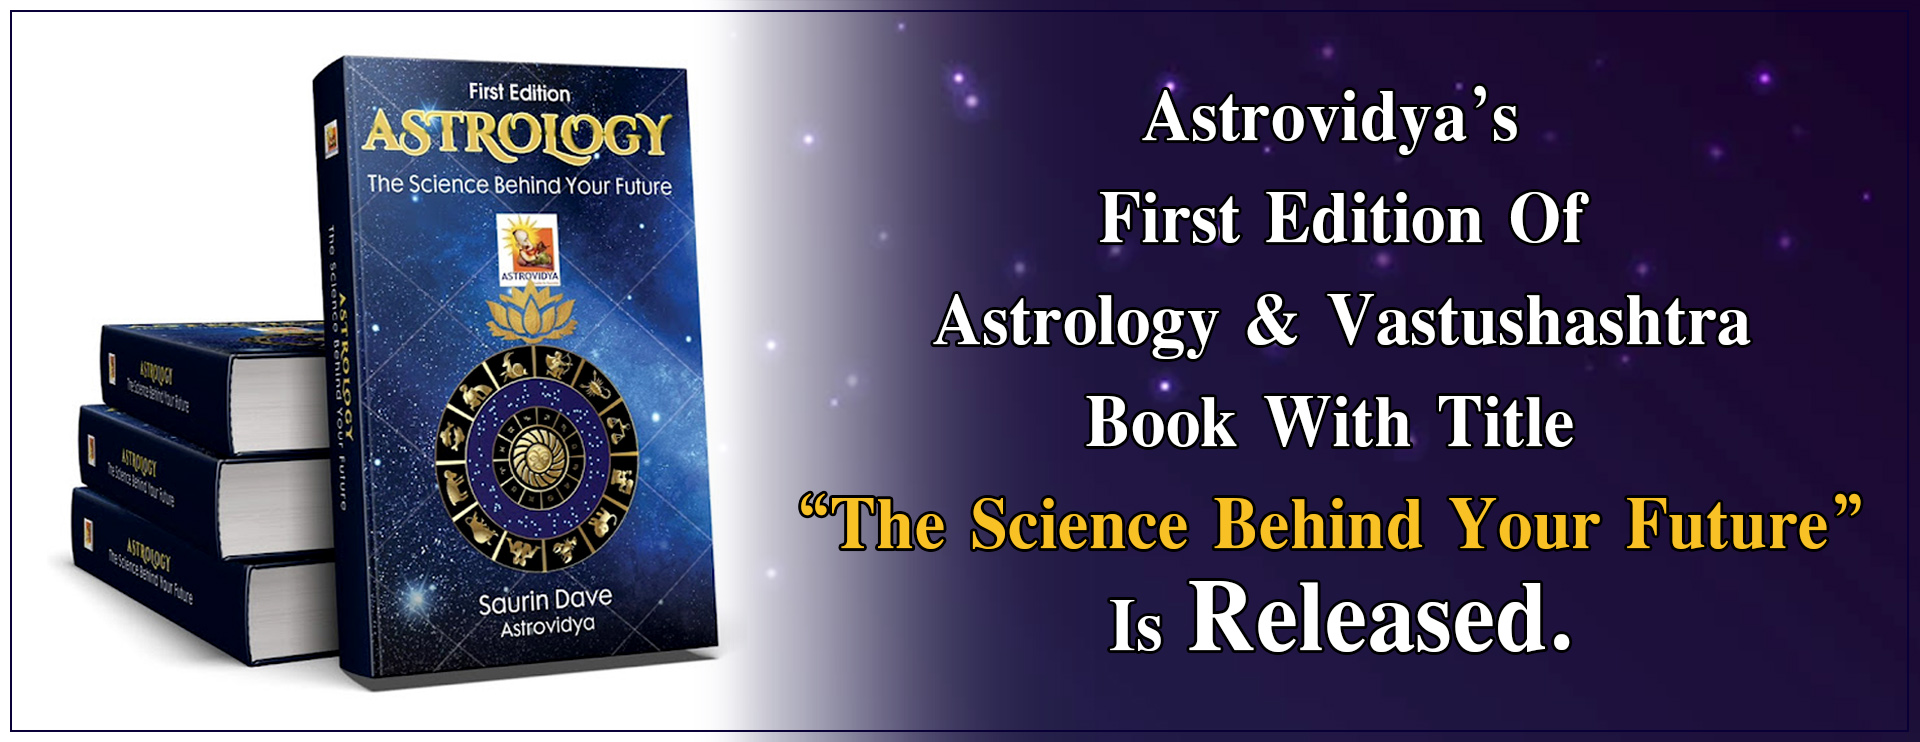 Astrovidya's first edition of Astrology and Vastushashtra book with Title 'The Science Behind Your Future' is realesed in Mumbai at Sidhivinayak Temple. 